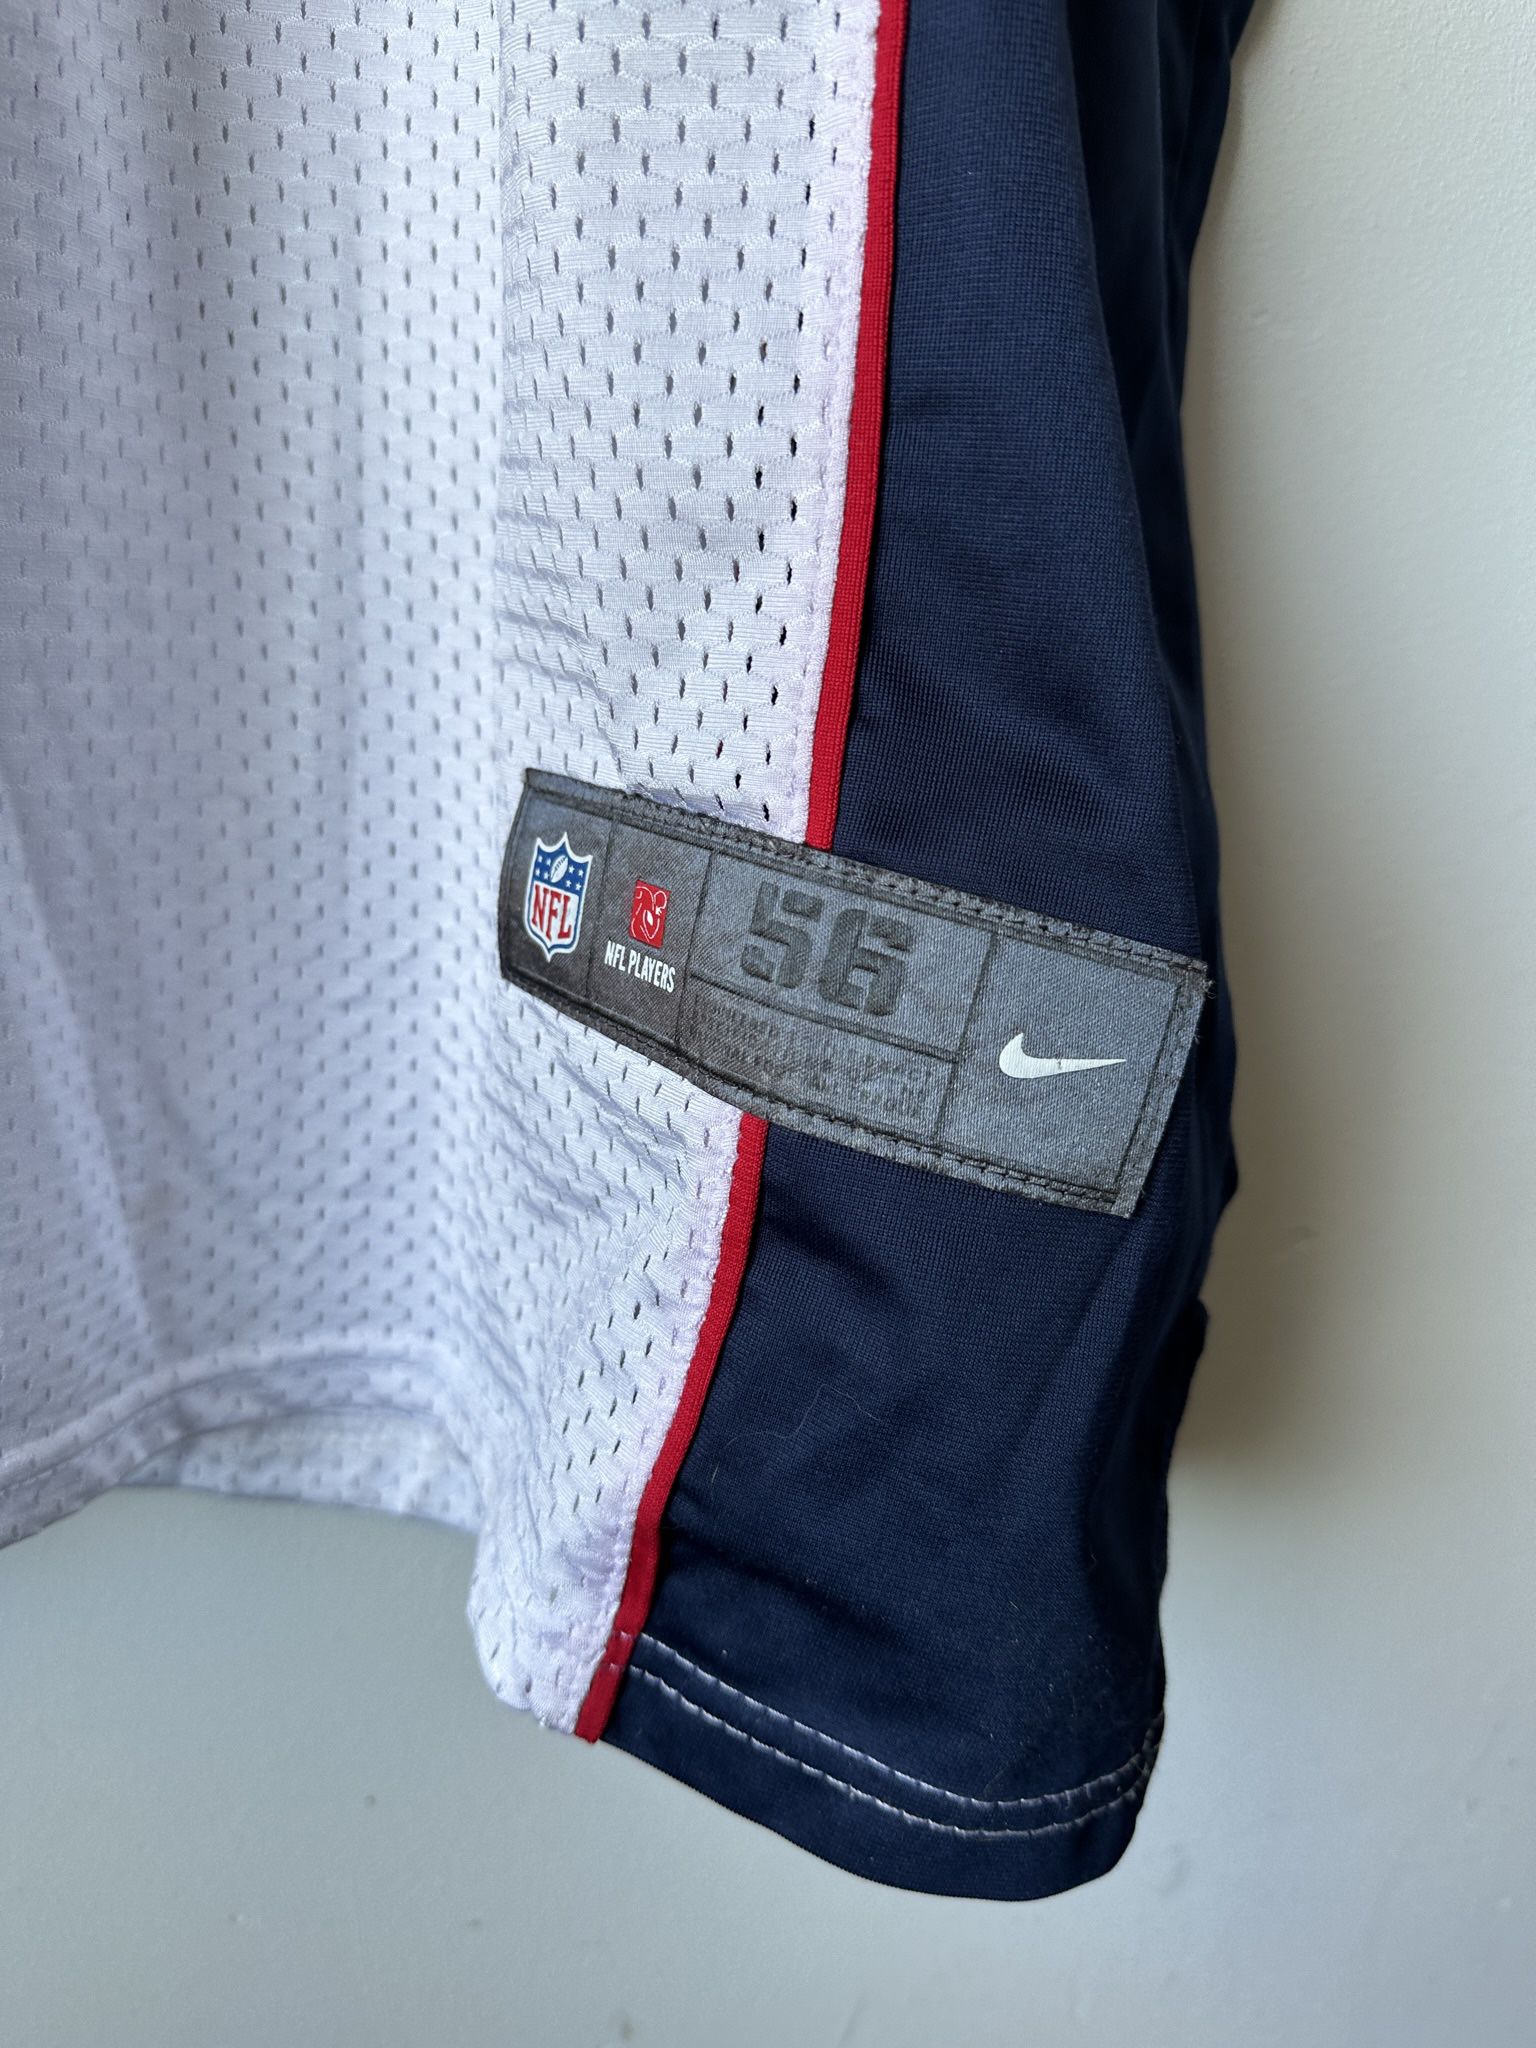 New England Patriots Nike Gronk Jersey